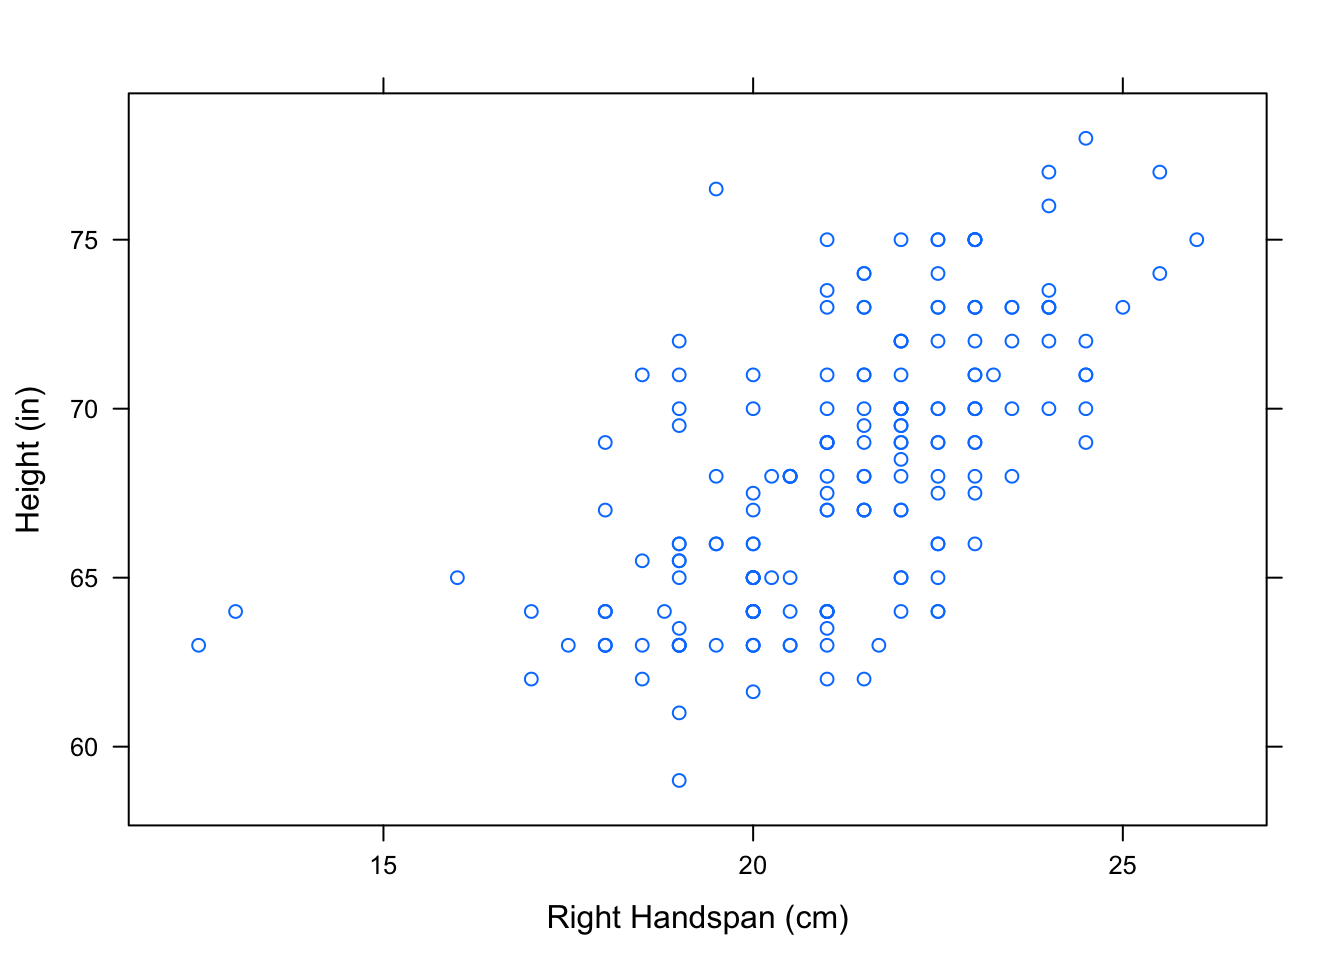 Hand/Height Scatterplot.  Relationship Between Right Handspan and Height